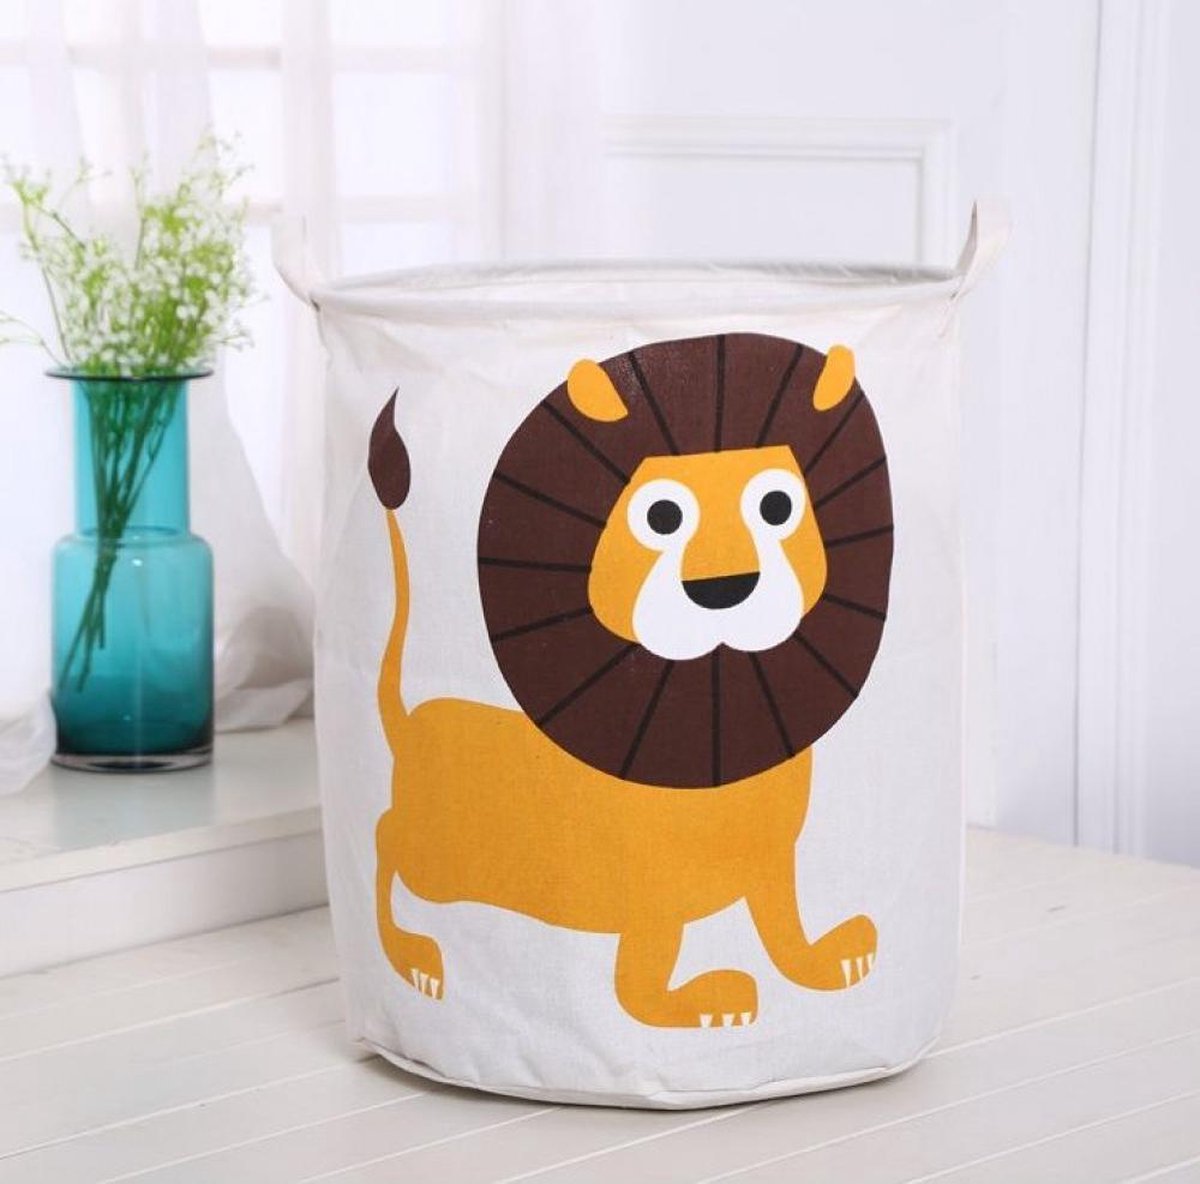 Container - Tas - Wasmand - Speelgoed mand - Uil